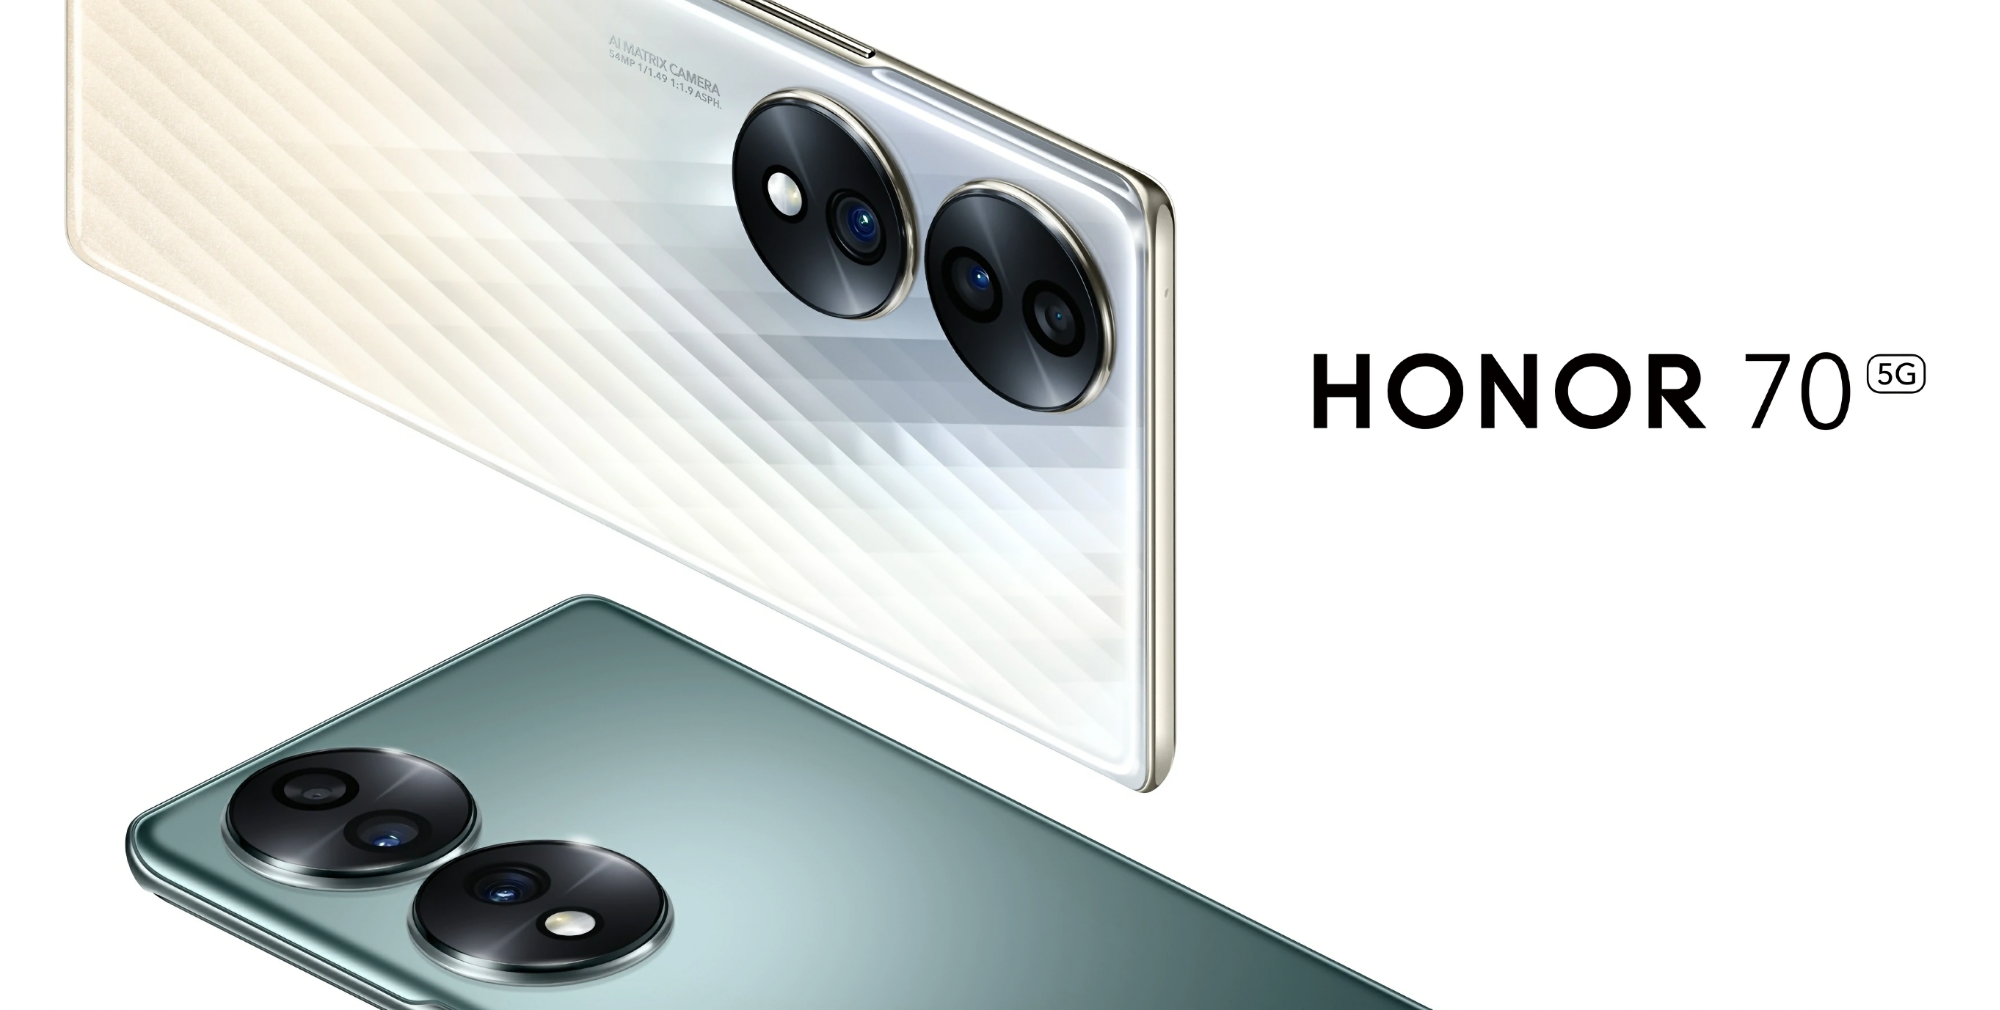 Honor 70 with Snapdragon 778G+ chip, 120 Hz AMOLED screen and 54 MP camera released to the global market